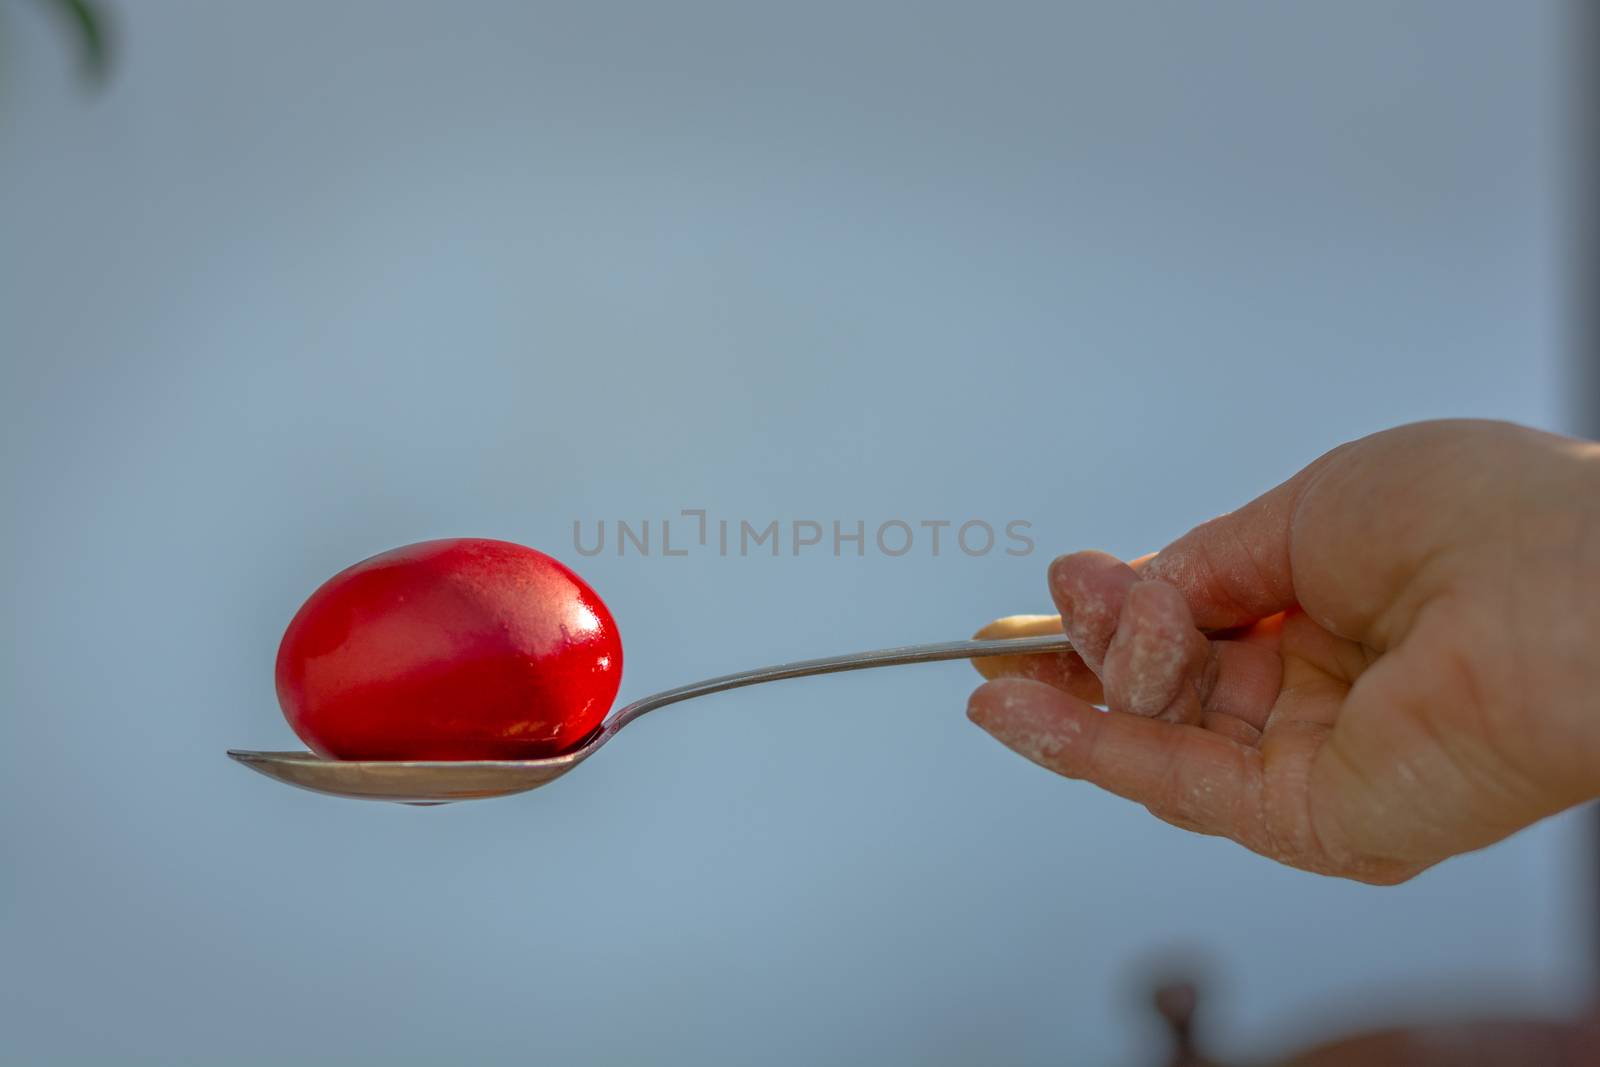 The first red Еaster egg going out of the painт in a metal spoon. by justbrotography